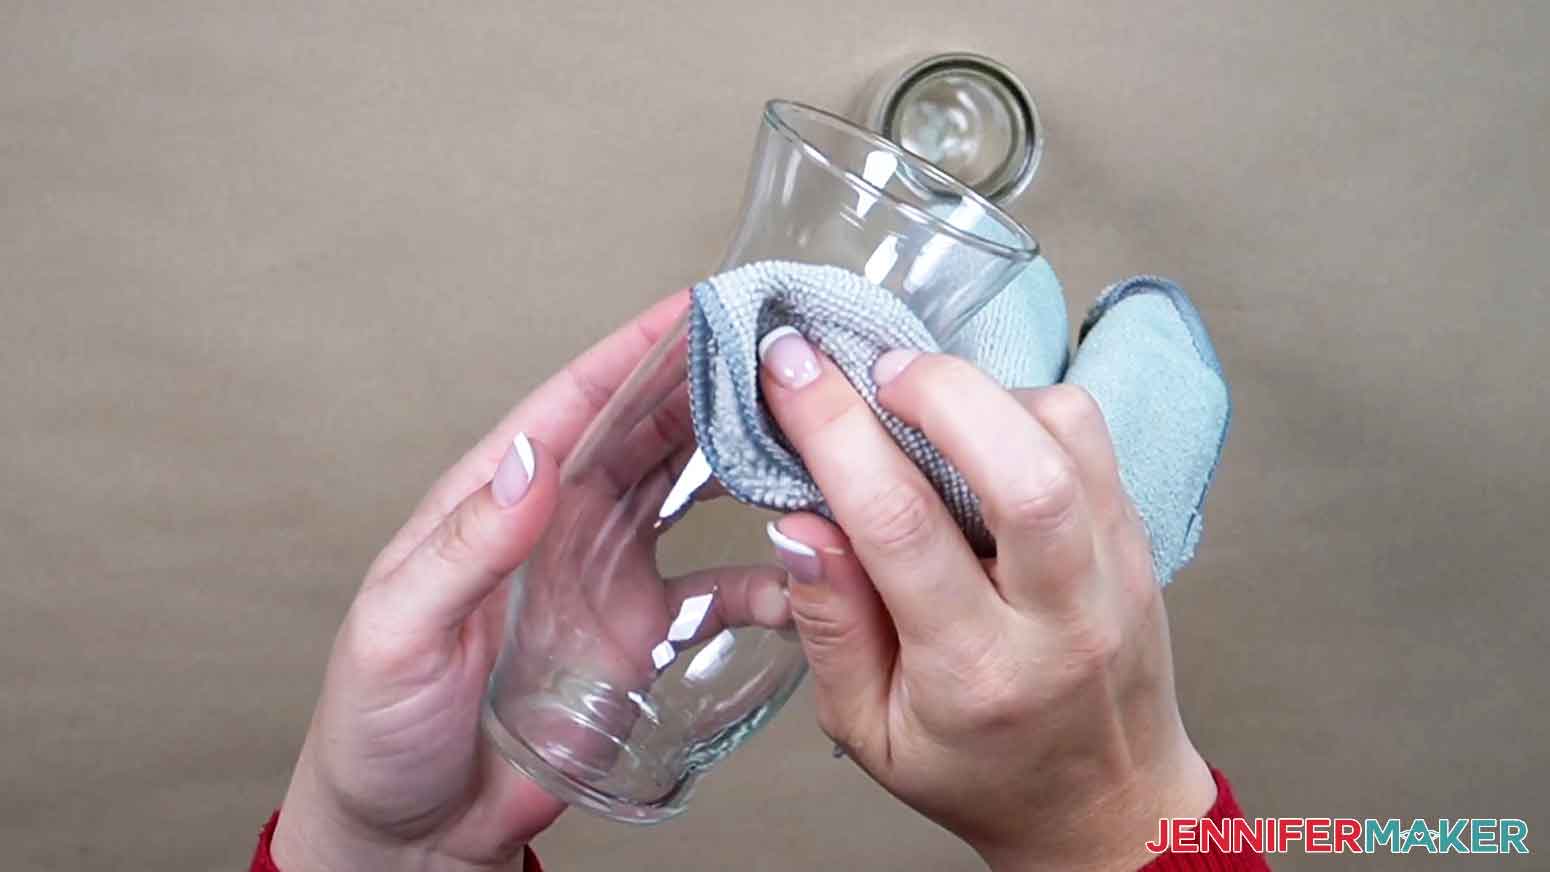 Clean glass vases with lint free cloth and rubbing alcohol to remove any residue or debris before painting.